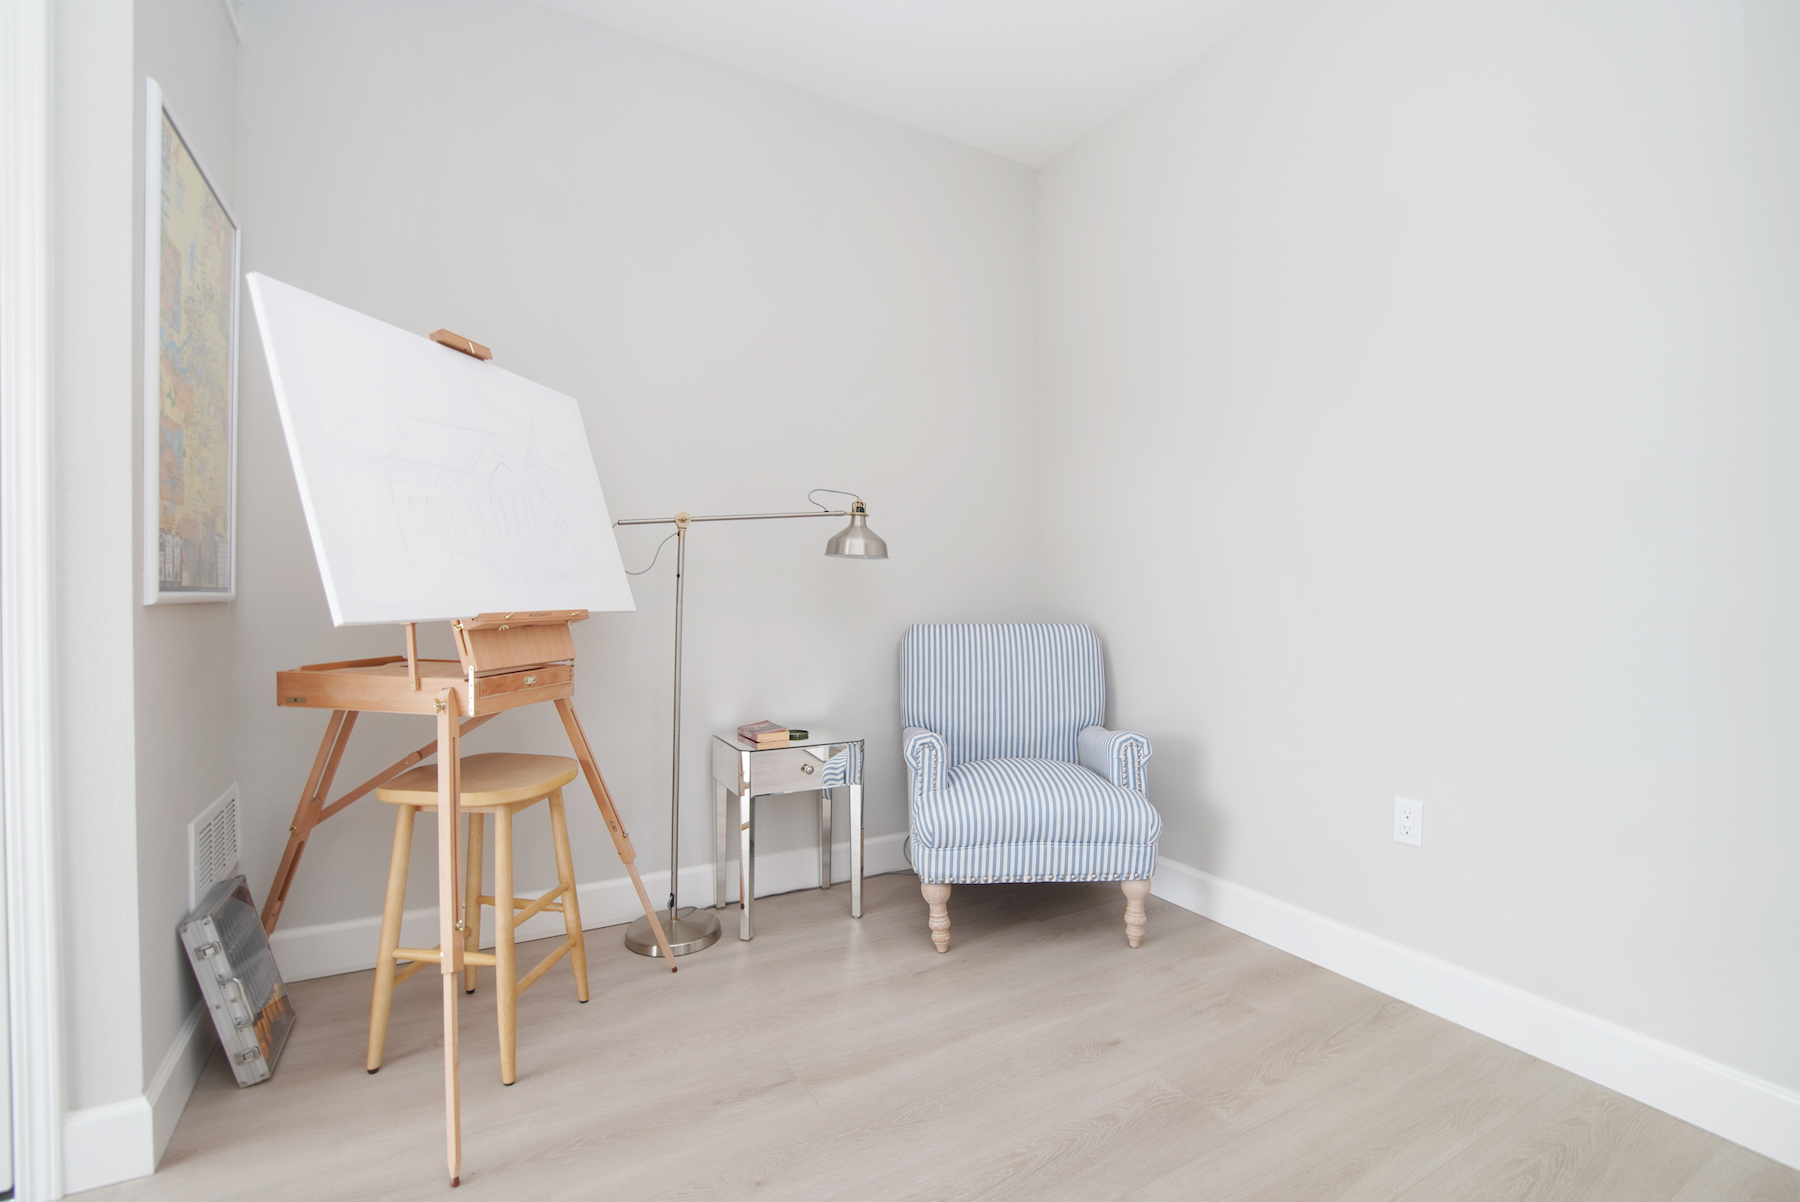 small art area with a canvas and chair